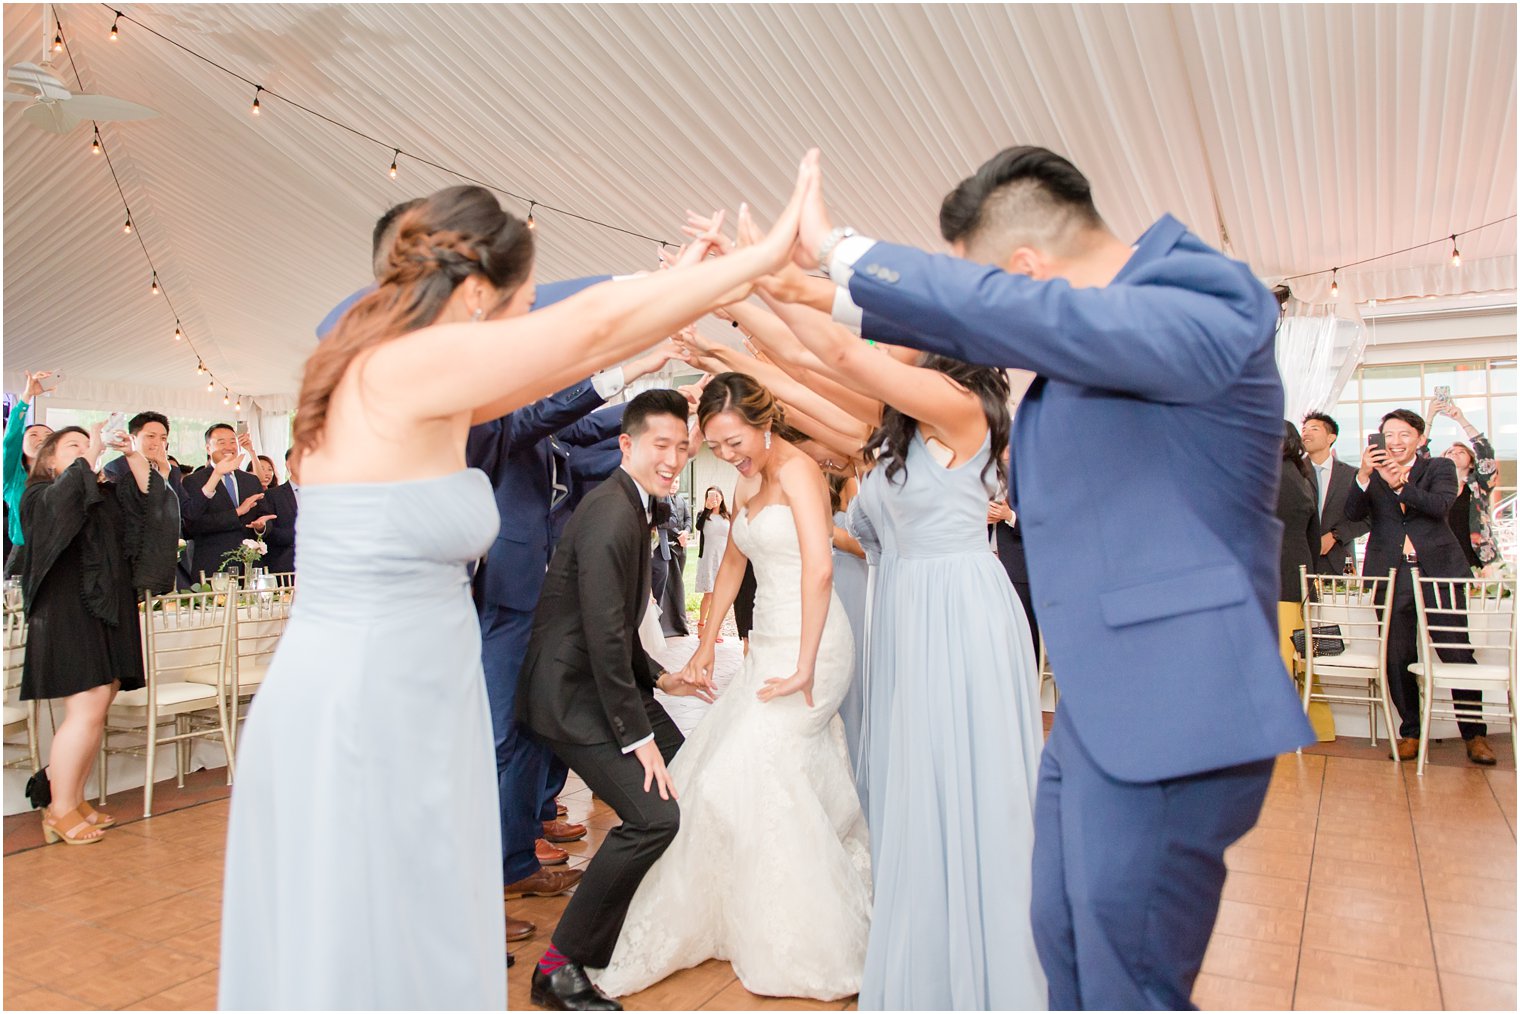 fun entrance to reception dance floor photographed by Idalia Photography